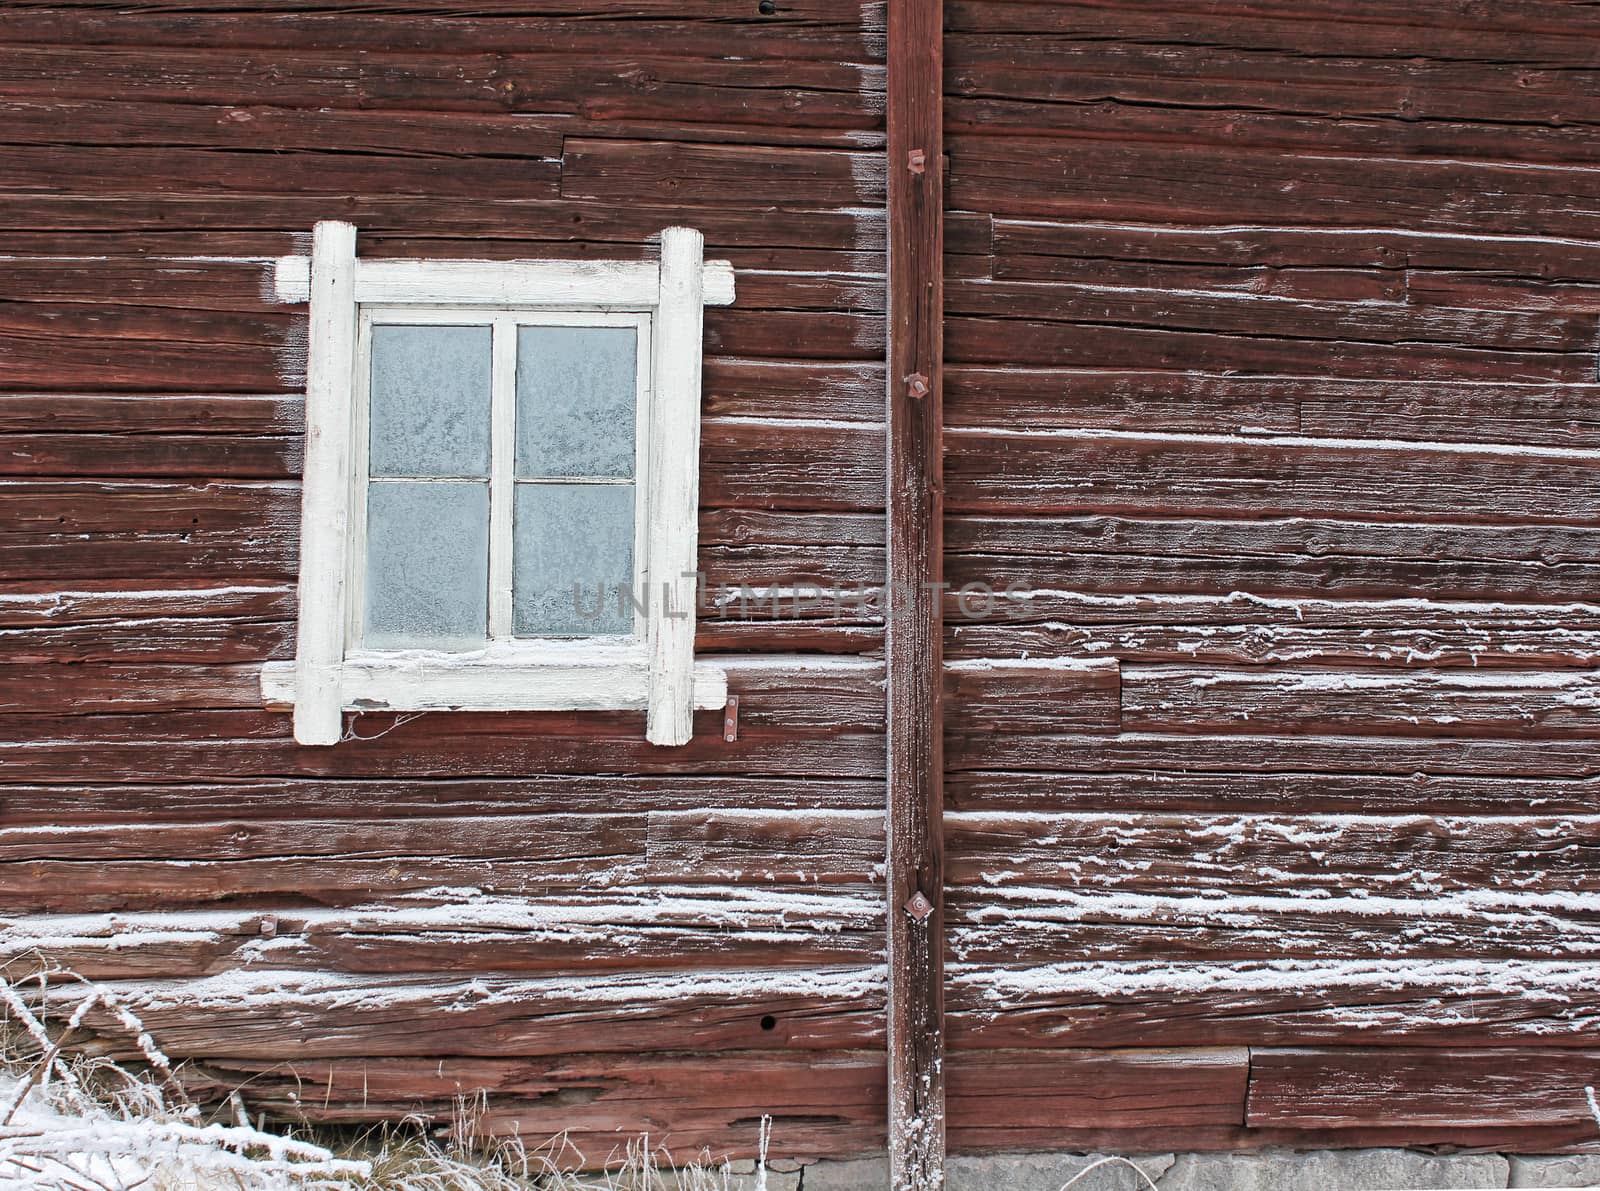 Frosty window of old log home by anterovium